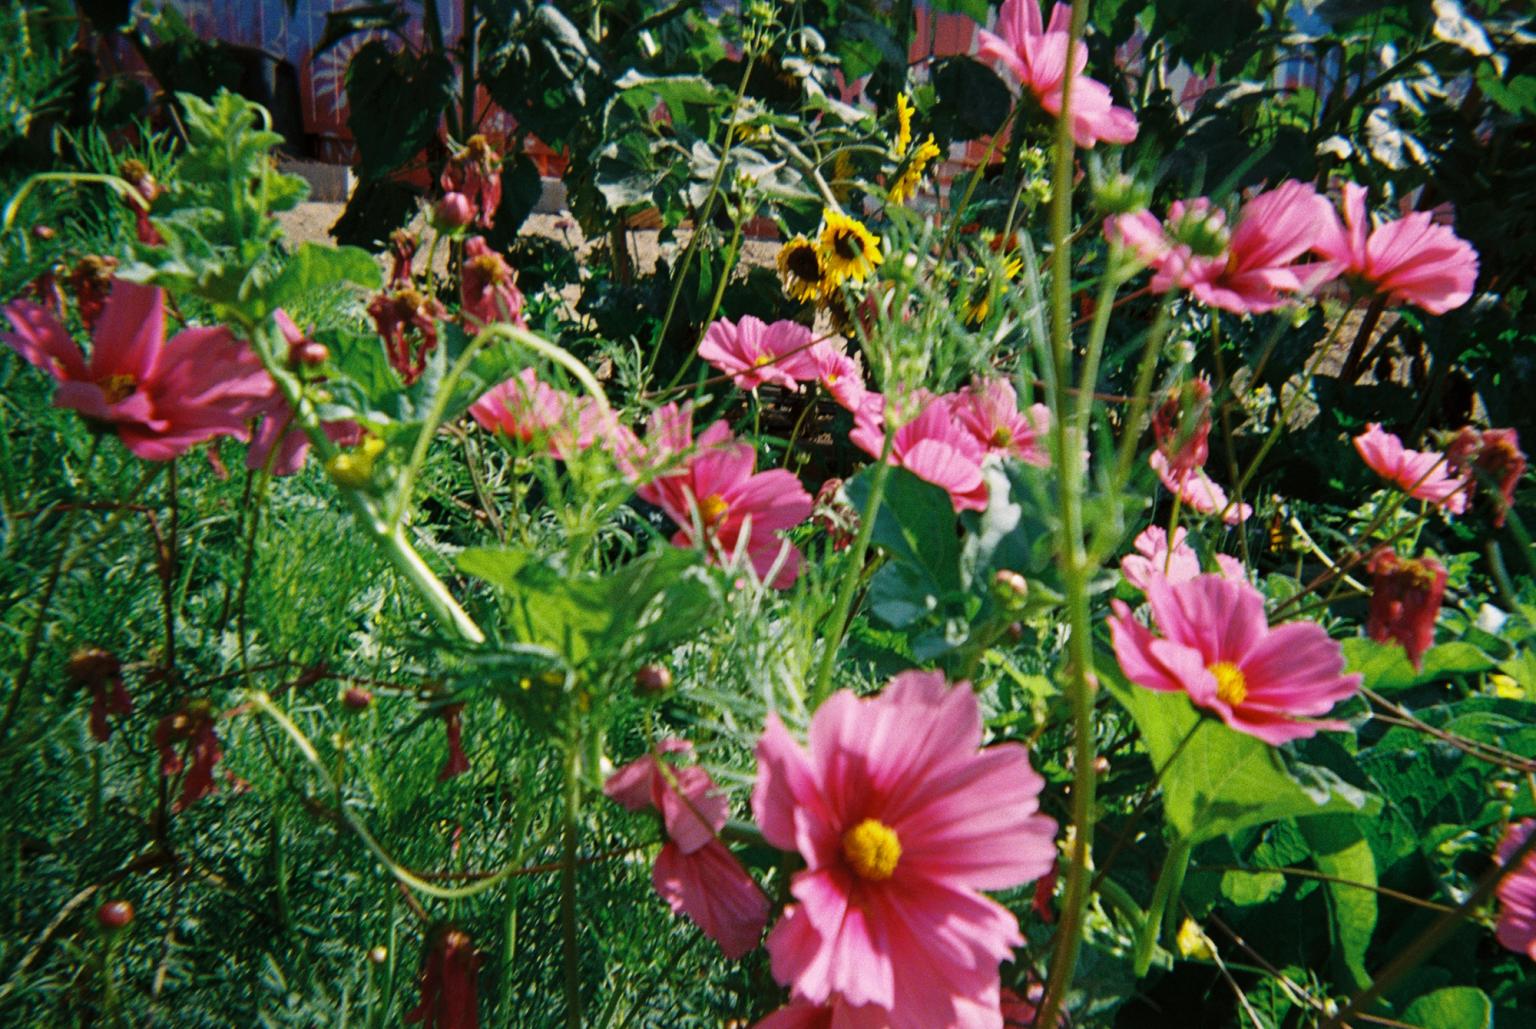 close up image of pink cosmos, sunflowers, and greenery